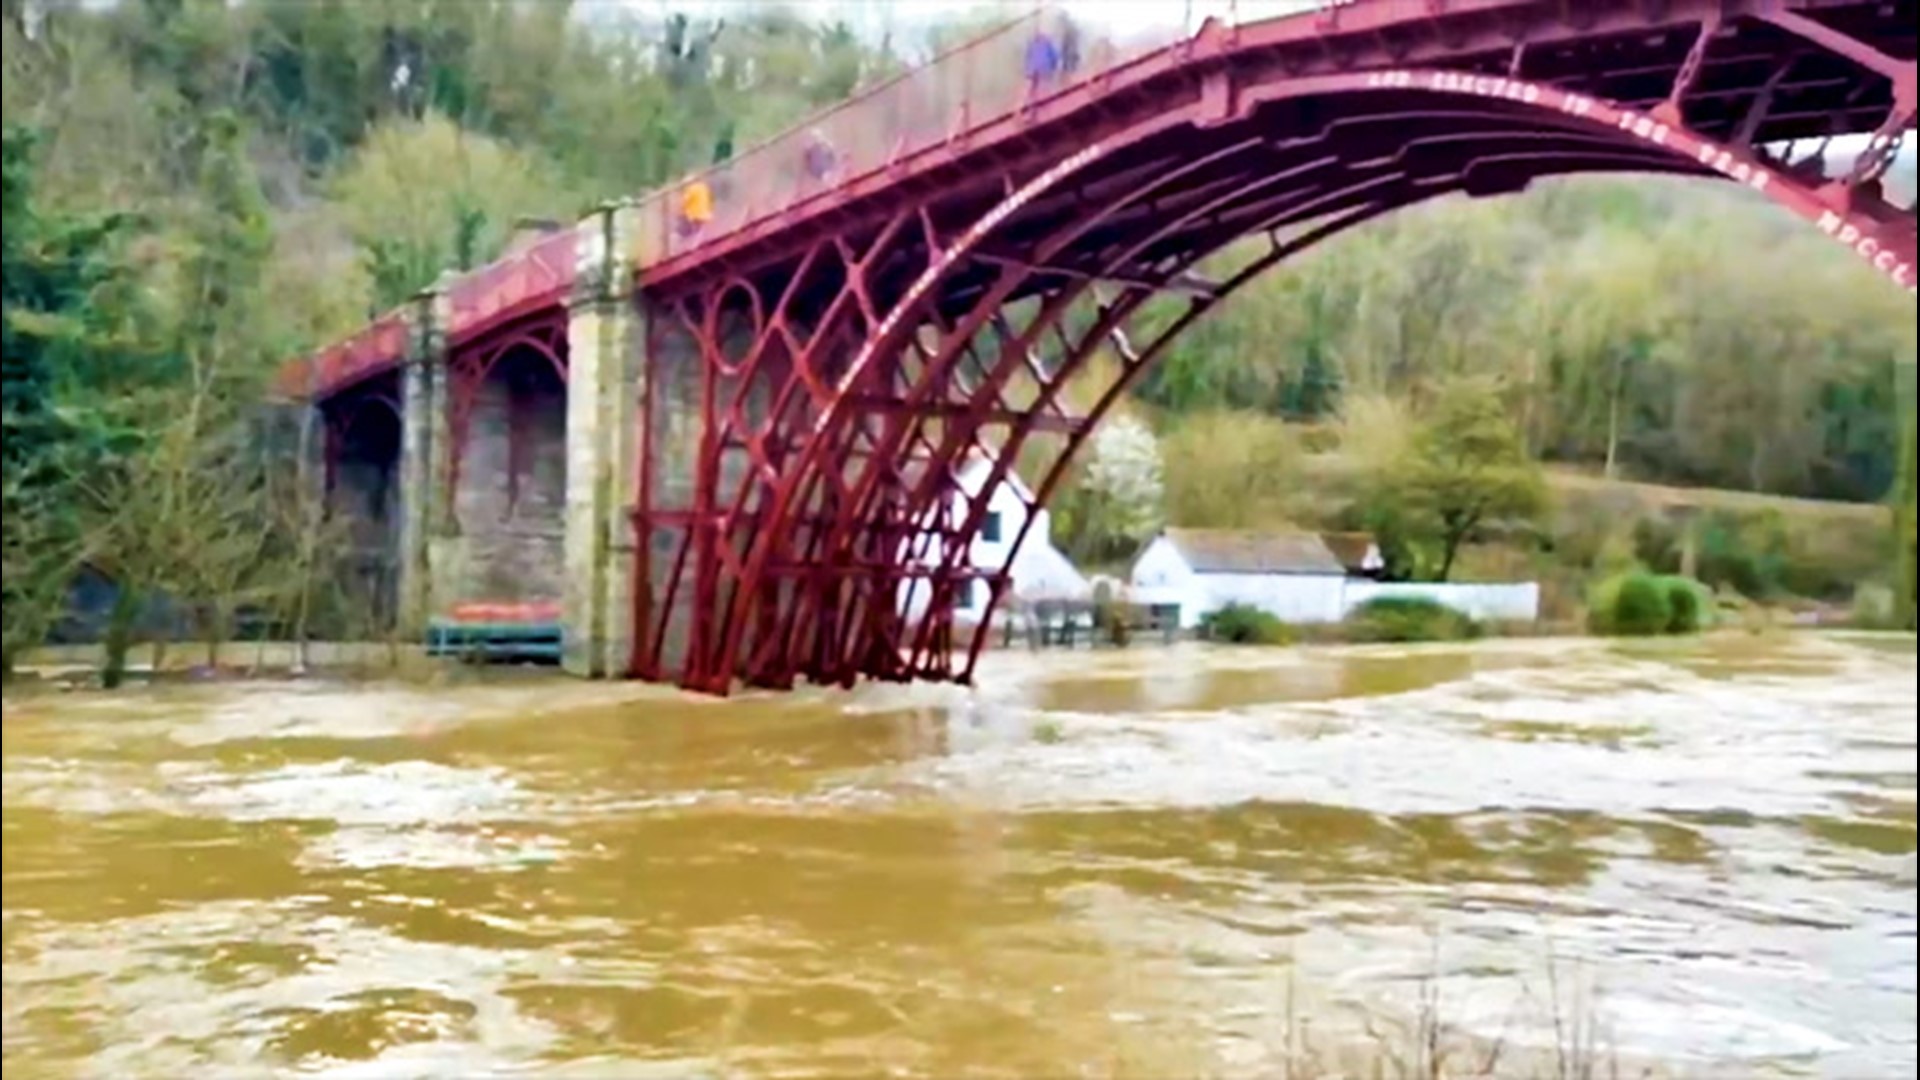 People in the town of Ironbridge, England, were evacuated on Feb. 26 as the River Severn breached flood barriers.